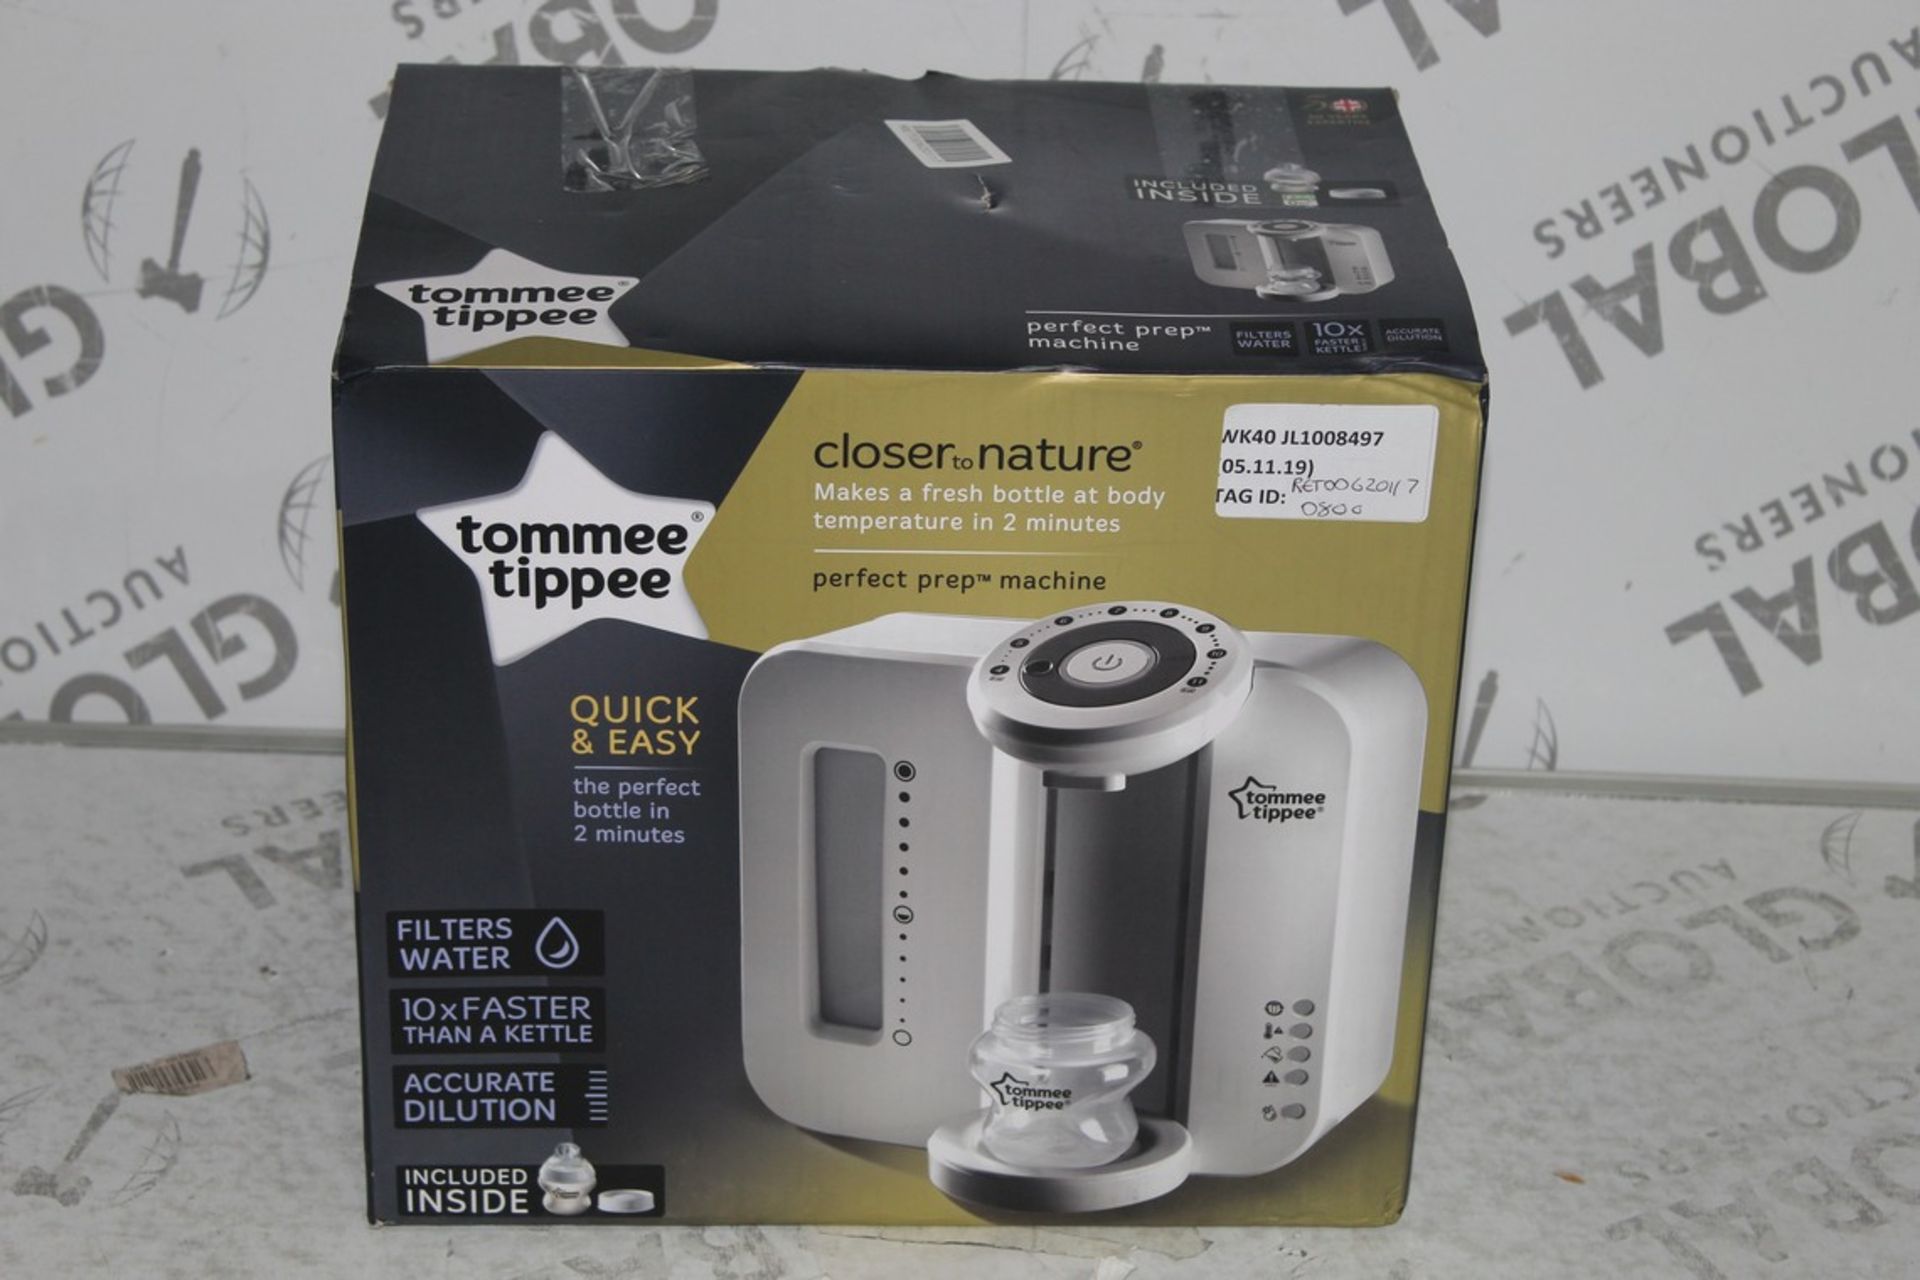 Boxed Tommee Tippee Perfect Preparation Bottle Warming Station RRP £80 (RET00620117) (Public Viewing